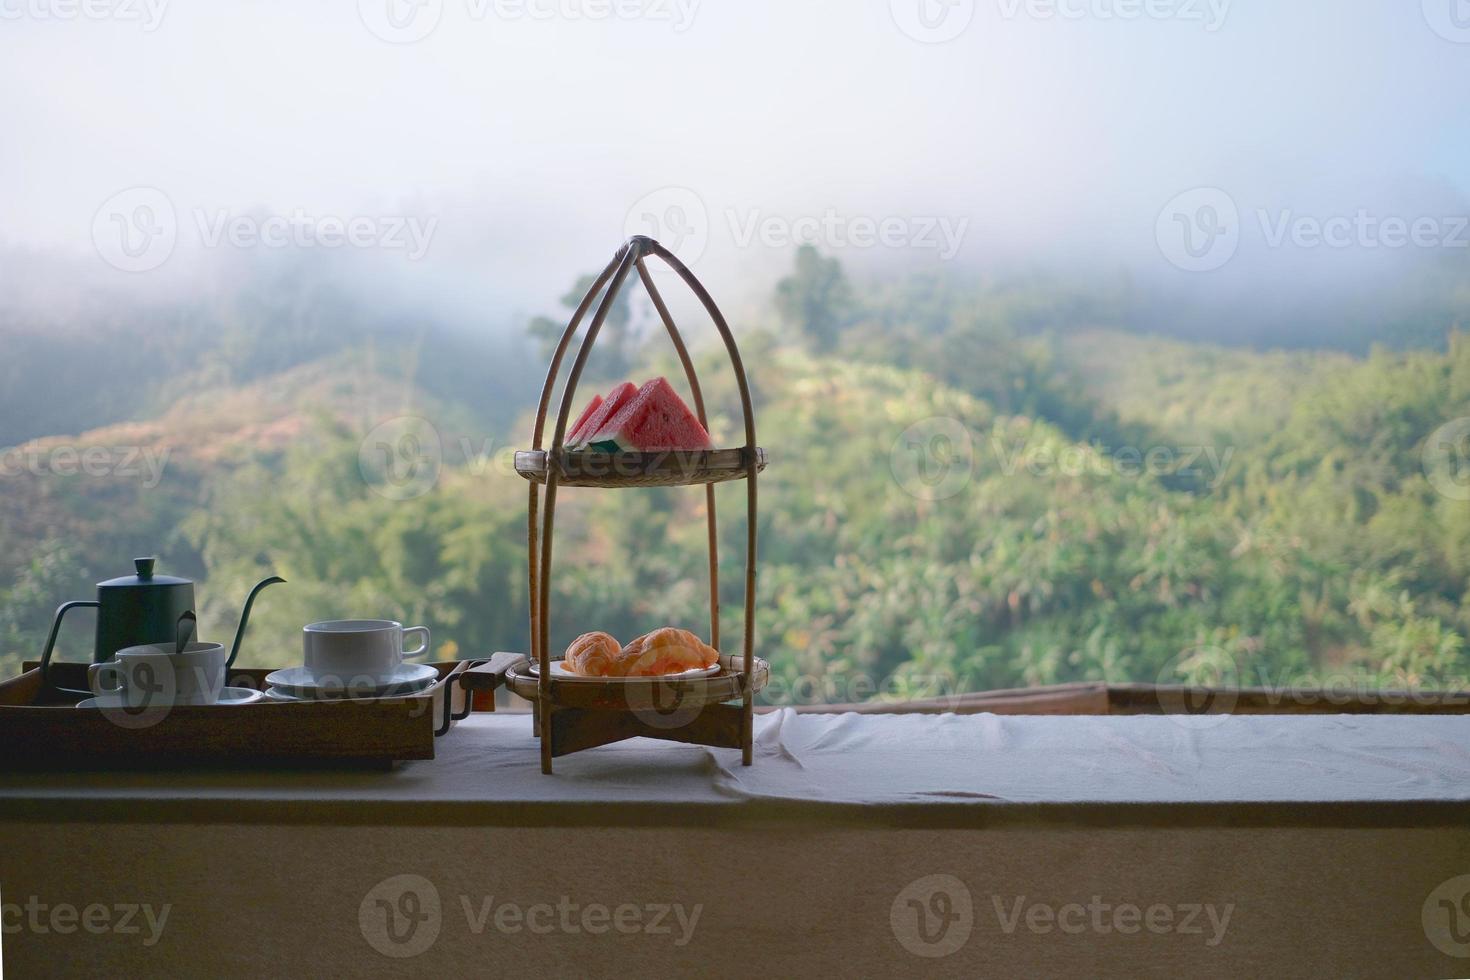 Pretty winter food set of natural resort breakfast meal, fresh watermelon, pie cup of coffee, and tea in kettle on wooden tray, eat in beautiful foggy mountain view, morning hill scenery landscape. photo